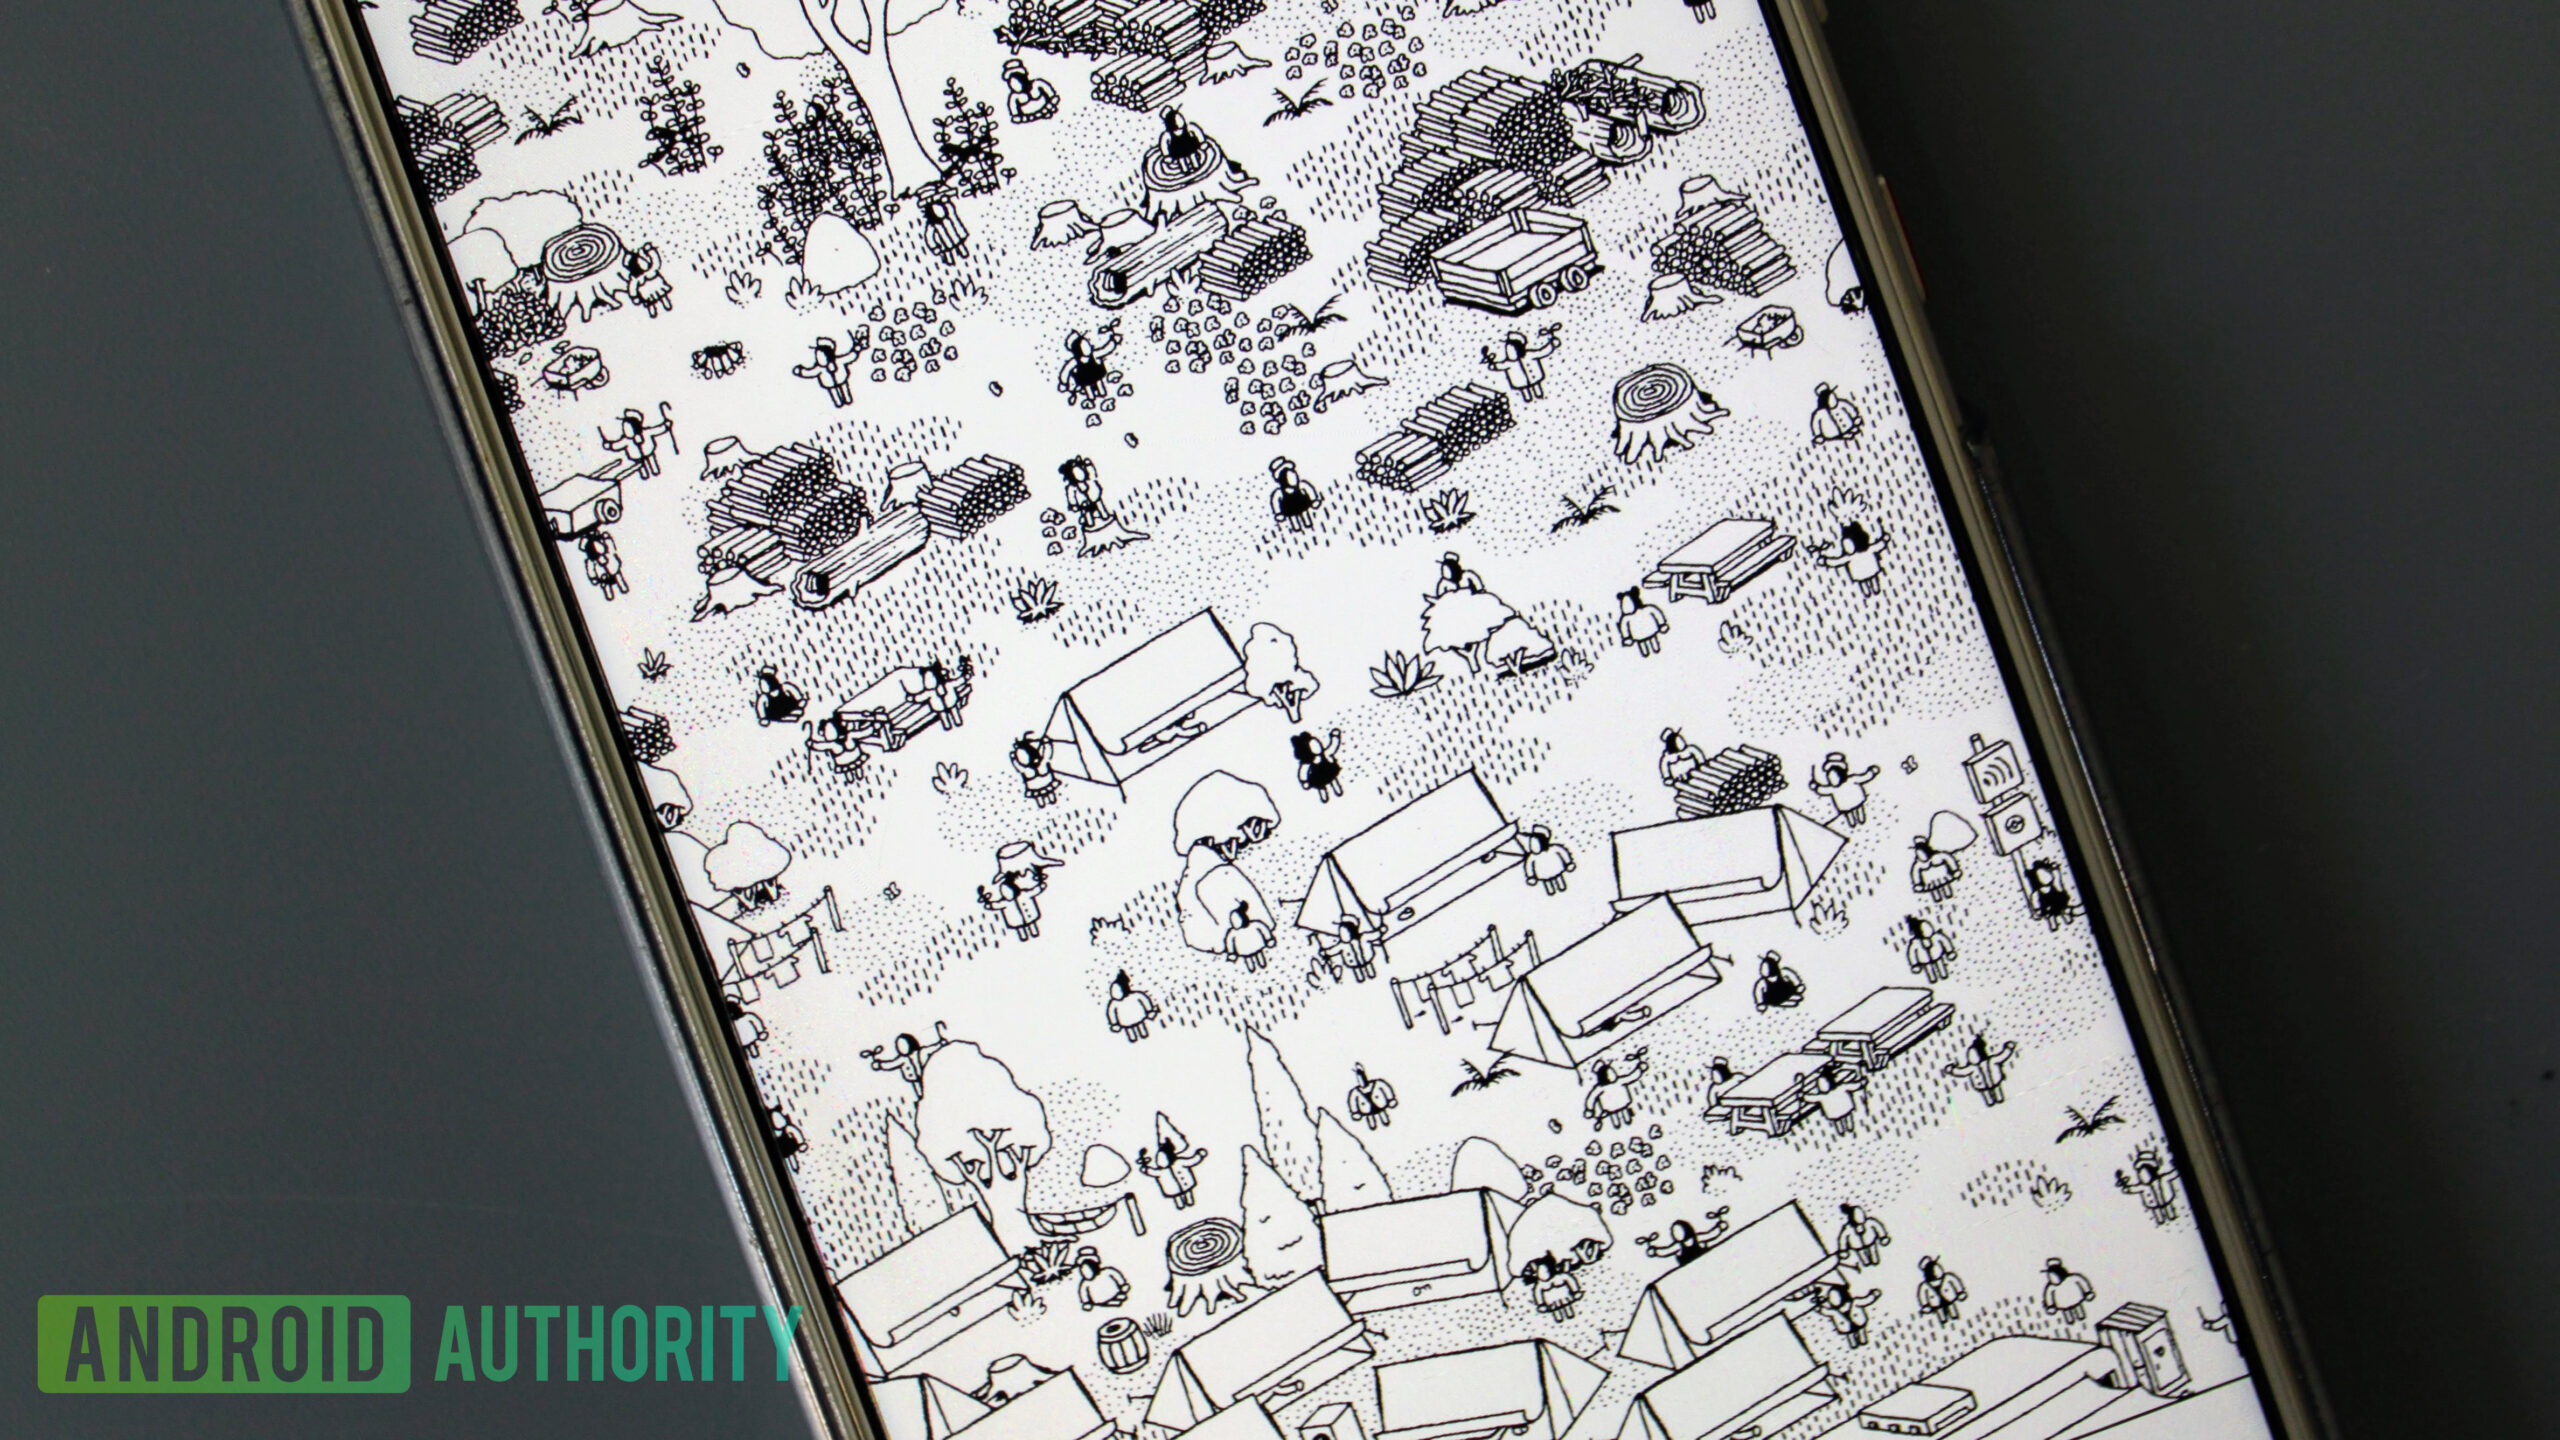 A close-up screenshot from Hidden Folks showing the black and white illustrations.